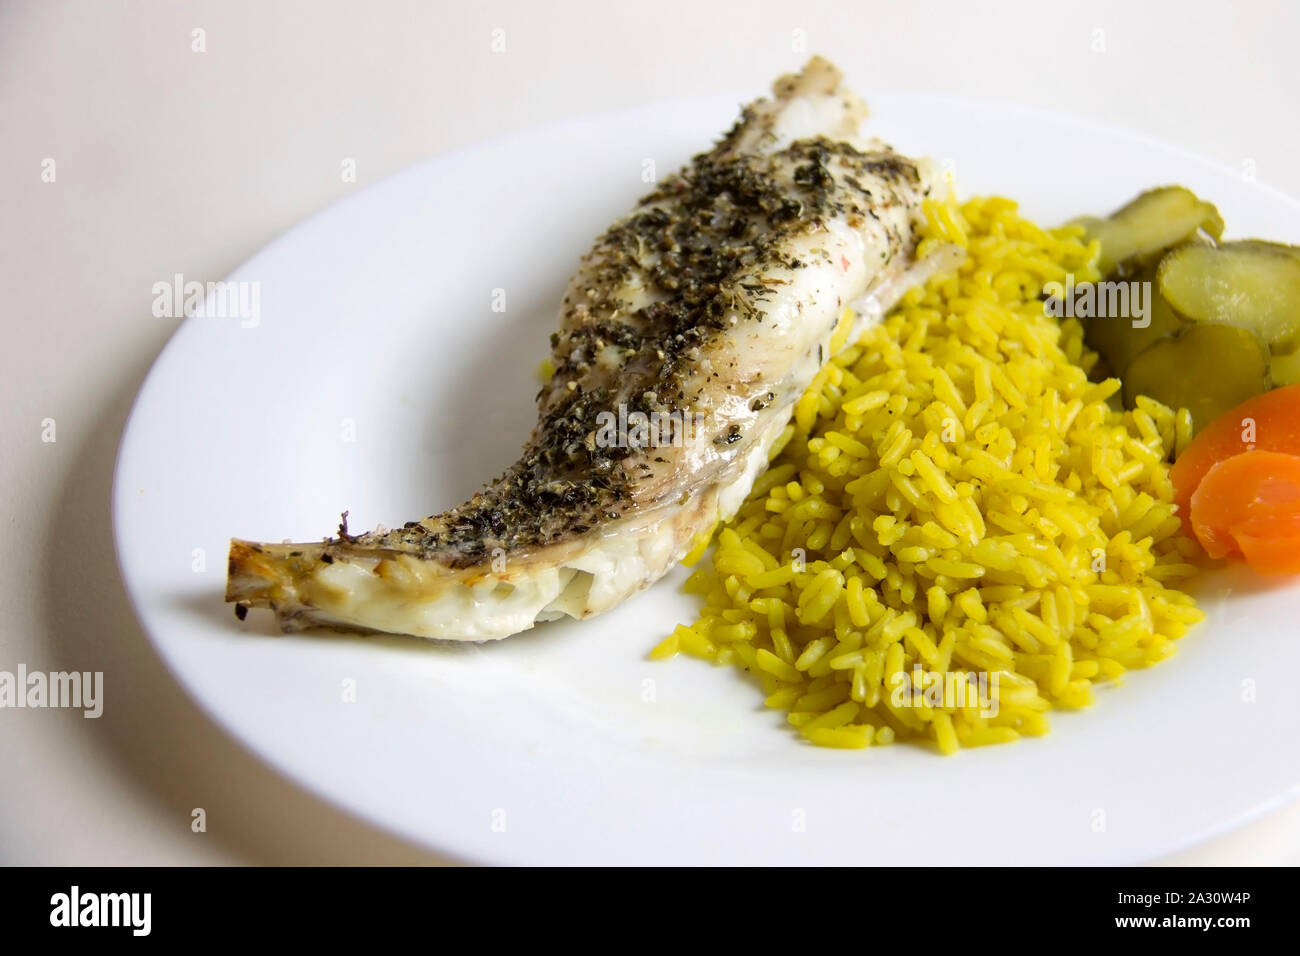 Healthy eating. Cooked, fried, ready to eat monkfish Stock Photo